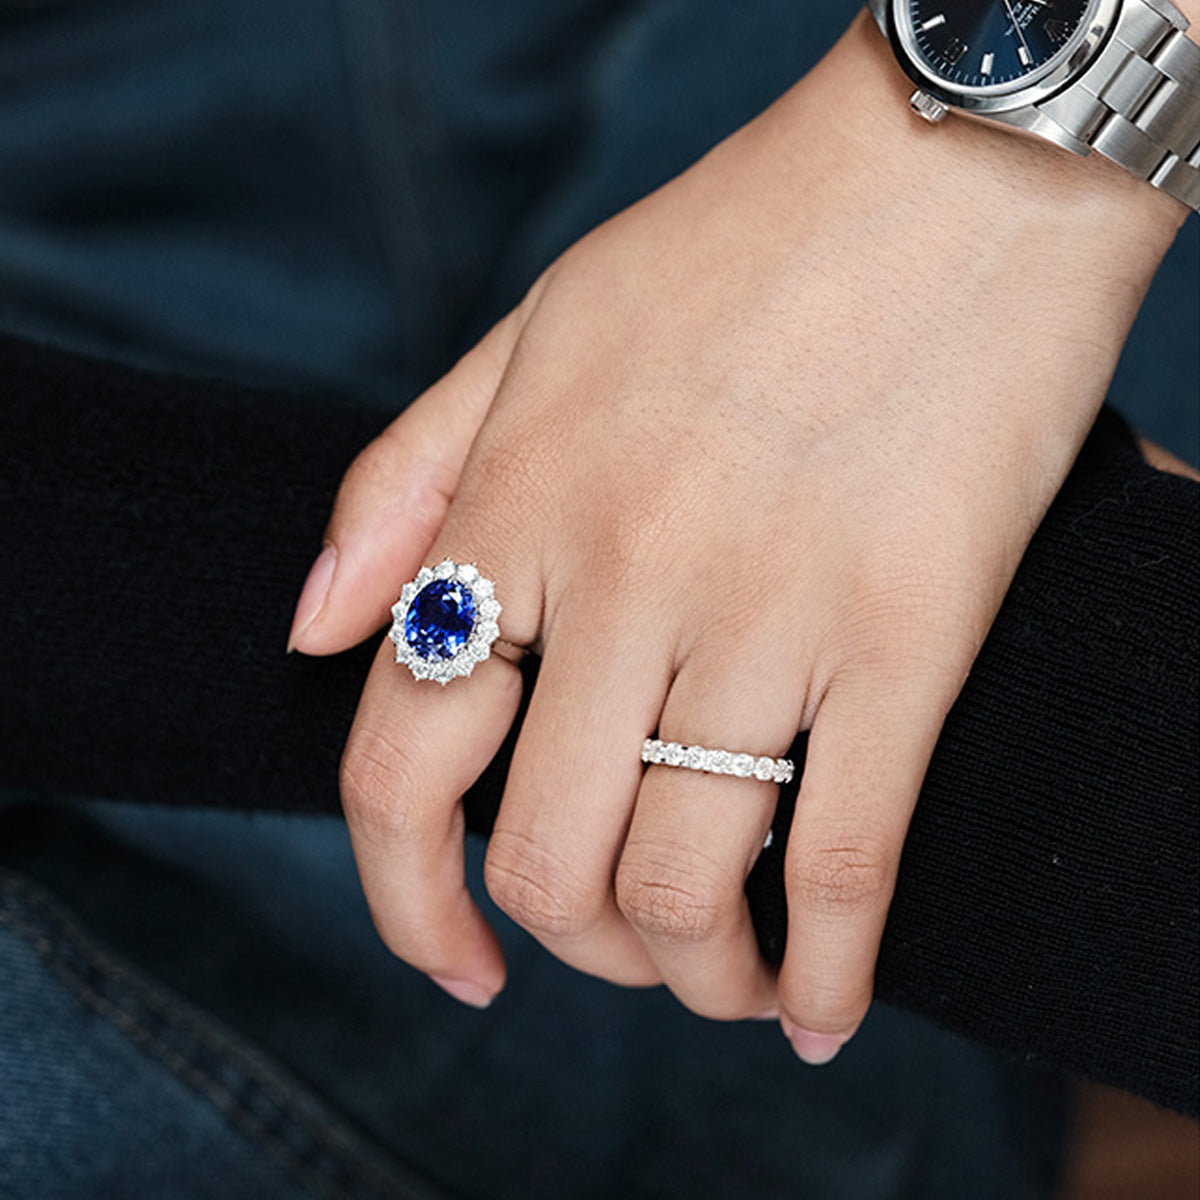 Siliice Jewelry - Sapphire Series - Princess Diana  Inspired Ring - Royal Blue Cornflower Ring Lab-grown Gemstones For Women